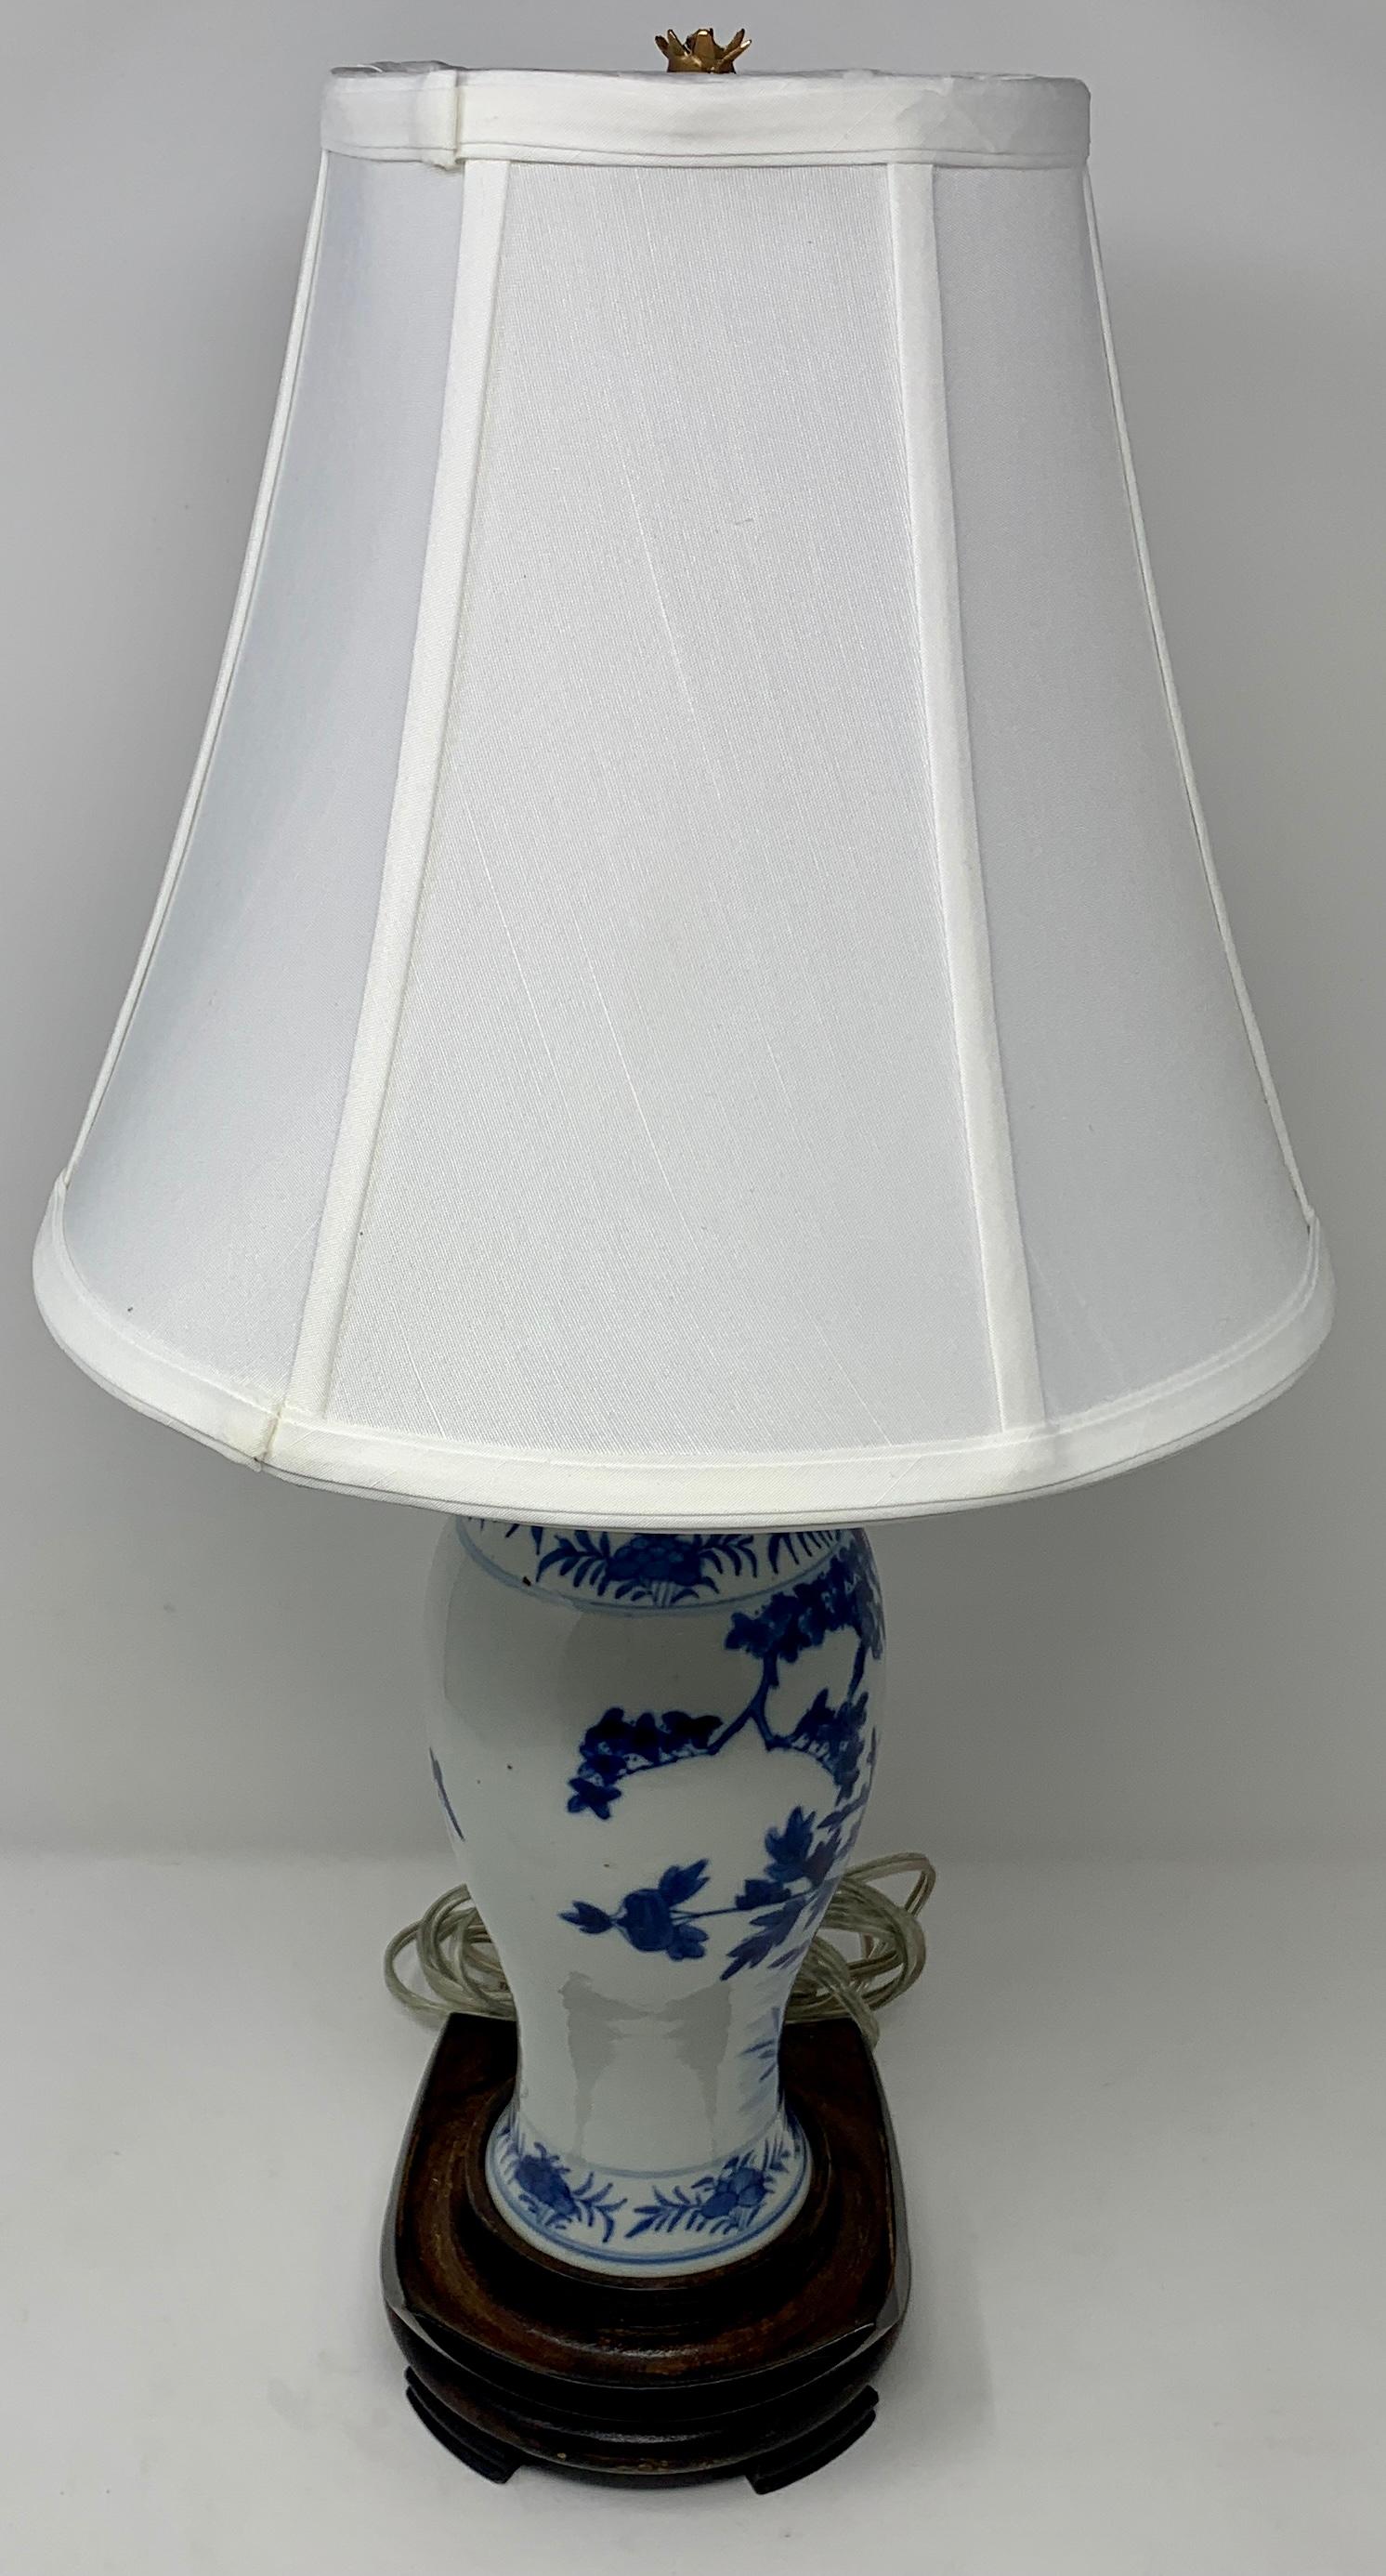 Antique Late 19th century Chinese blue and white porcelain lamp.

Lamp shade - 10 inches wide.